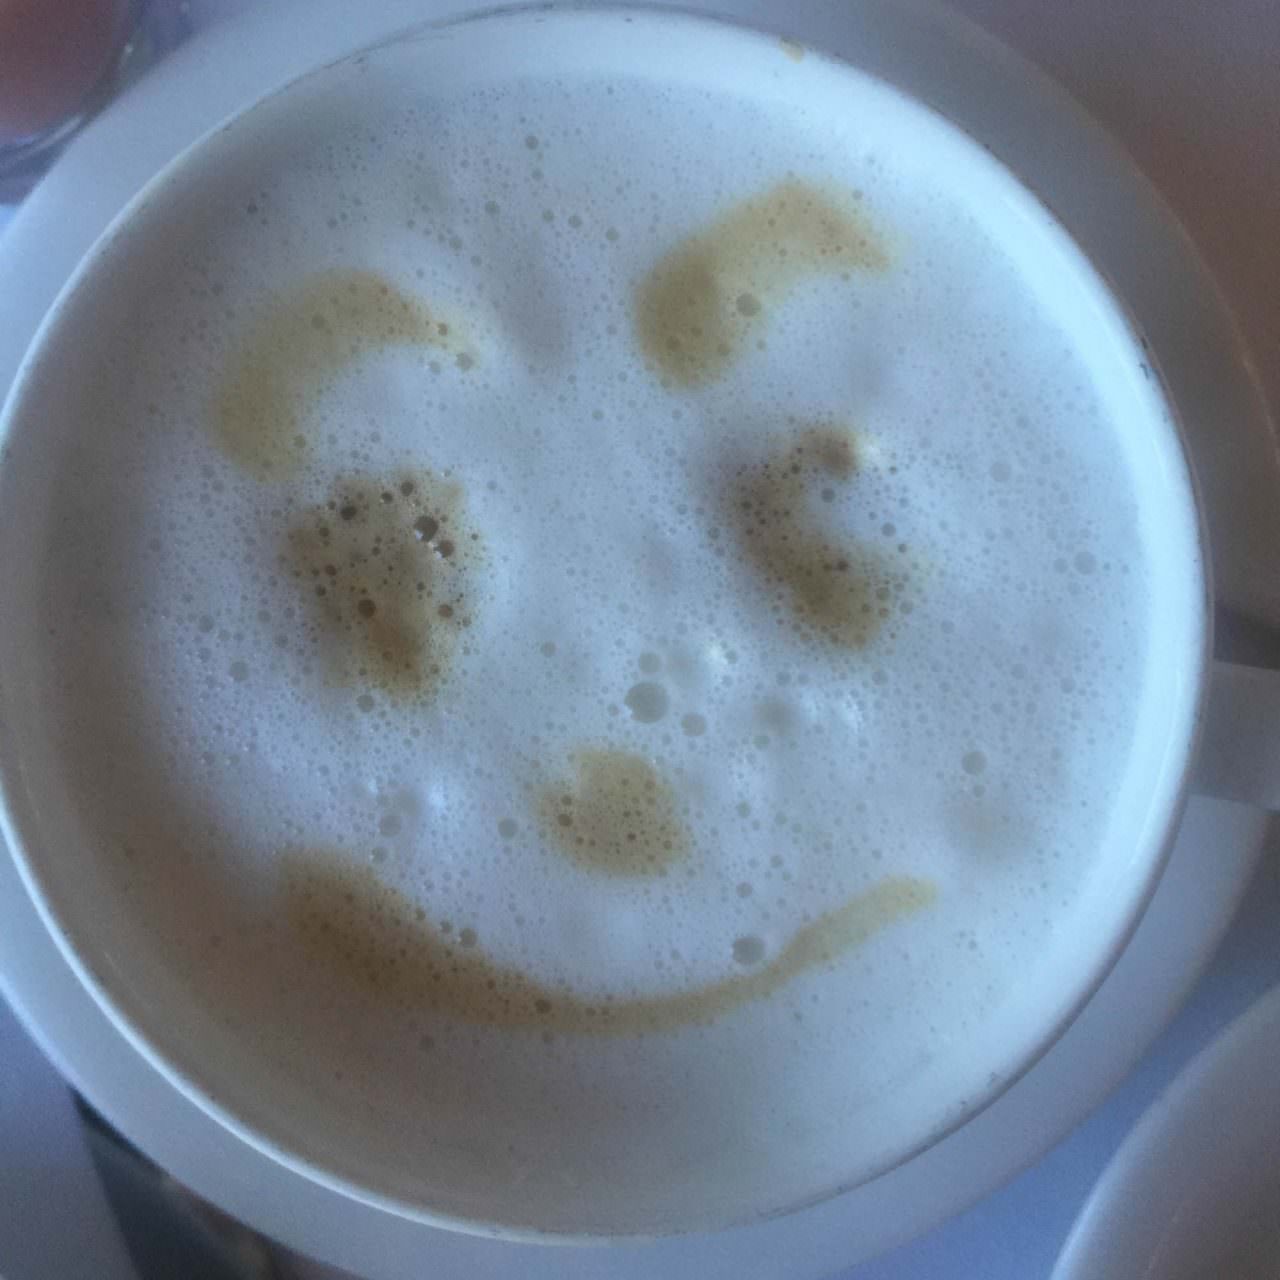 'Happuccino,' served each morning by Roxana Elena. © 2016 Ralph Grizzle